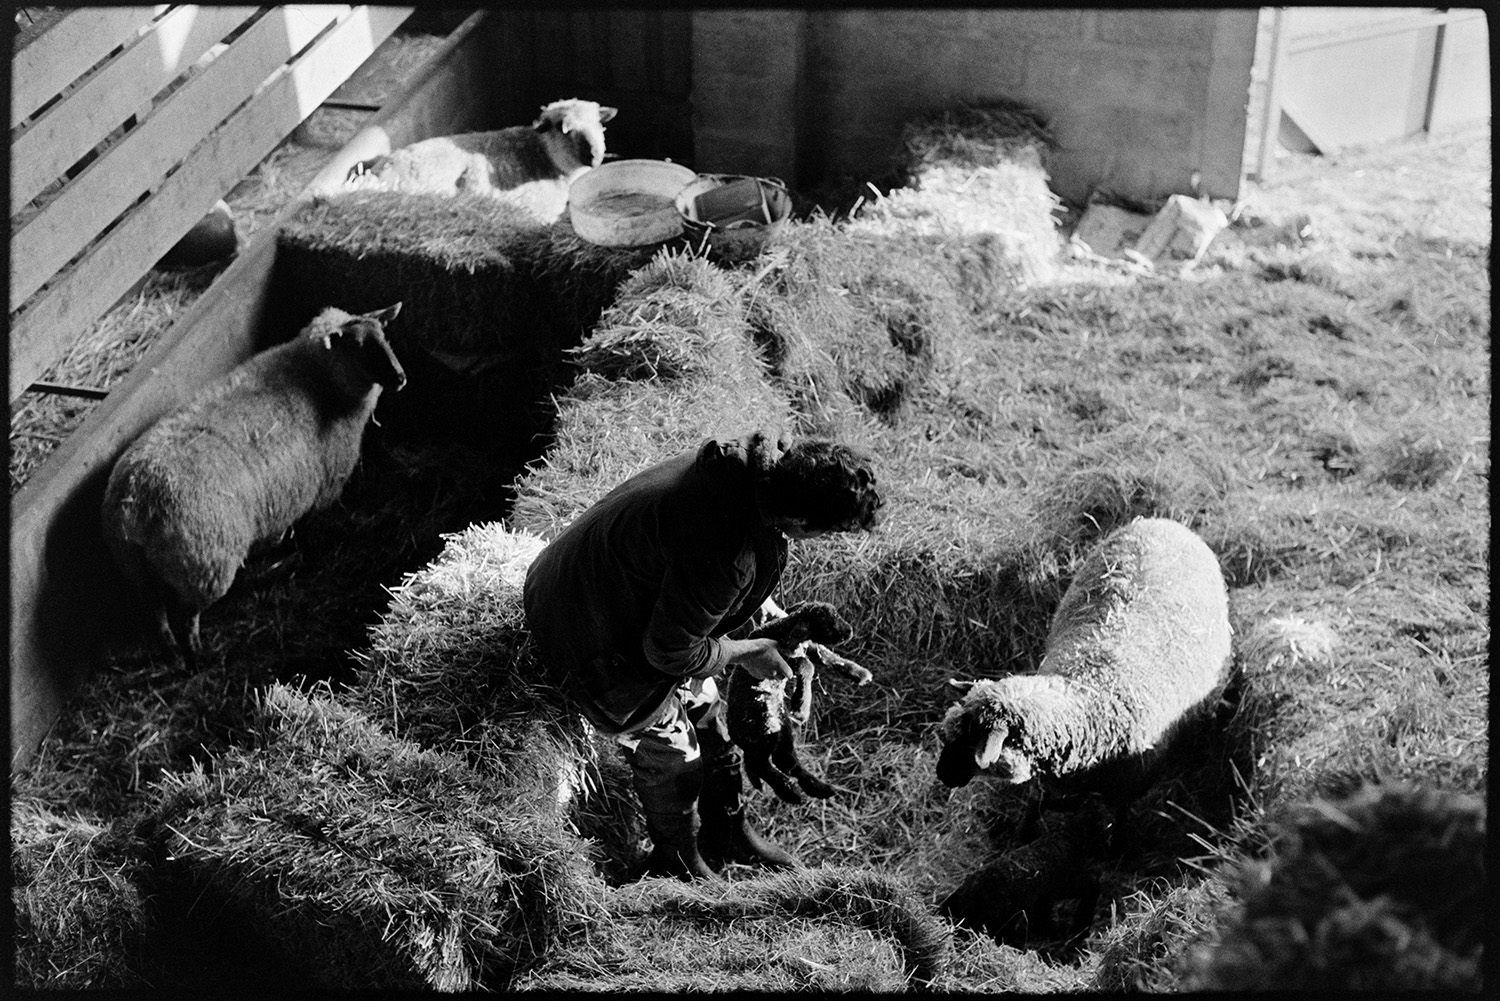 Farmer checking ewes and lambs and feeding in barn. 
[Graham ward checking ewes and lambs in a barn at Parsonage, Iddesleigh. The ewes and lambs are surrounded by hay bales.]